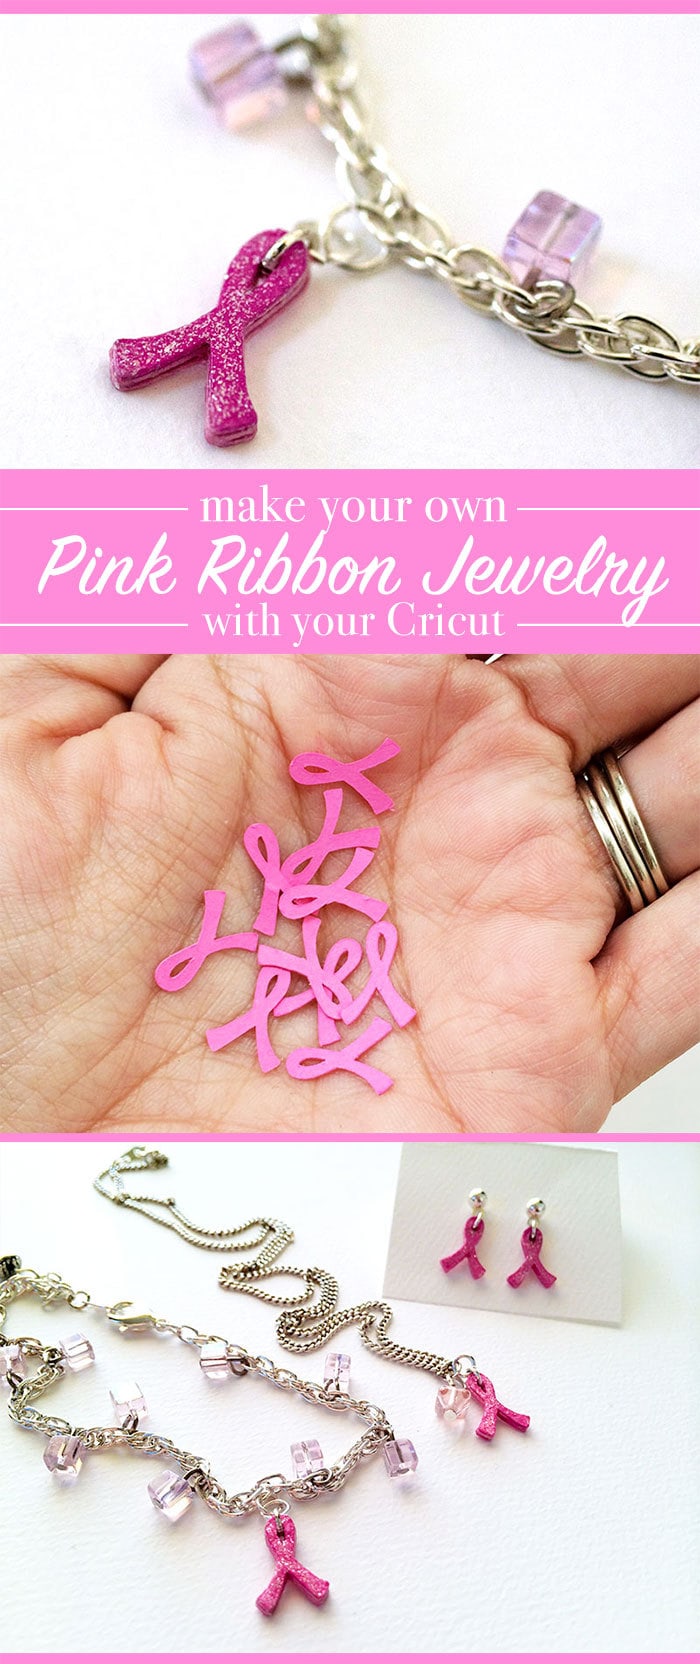 Make your own Pink Ribbon jewelry with your Cricut - designed by Jen Goode to support Breast Cancer Awareness - DIY BCA Jewelry